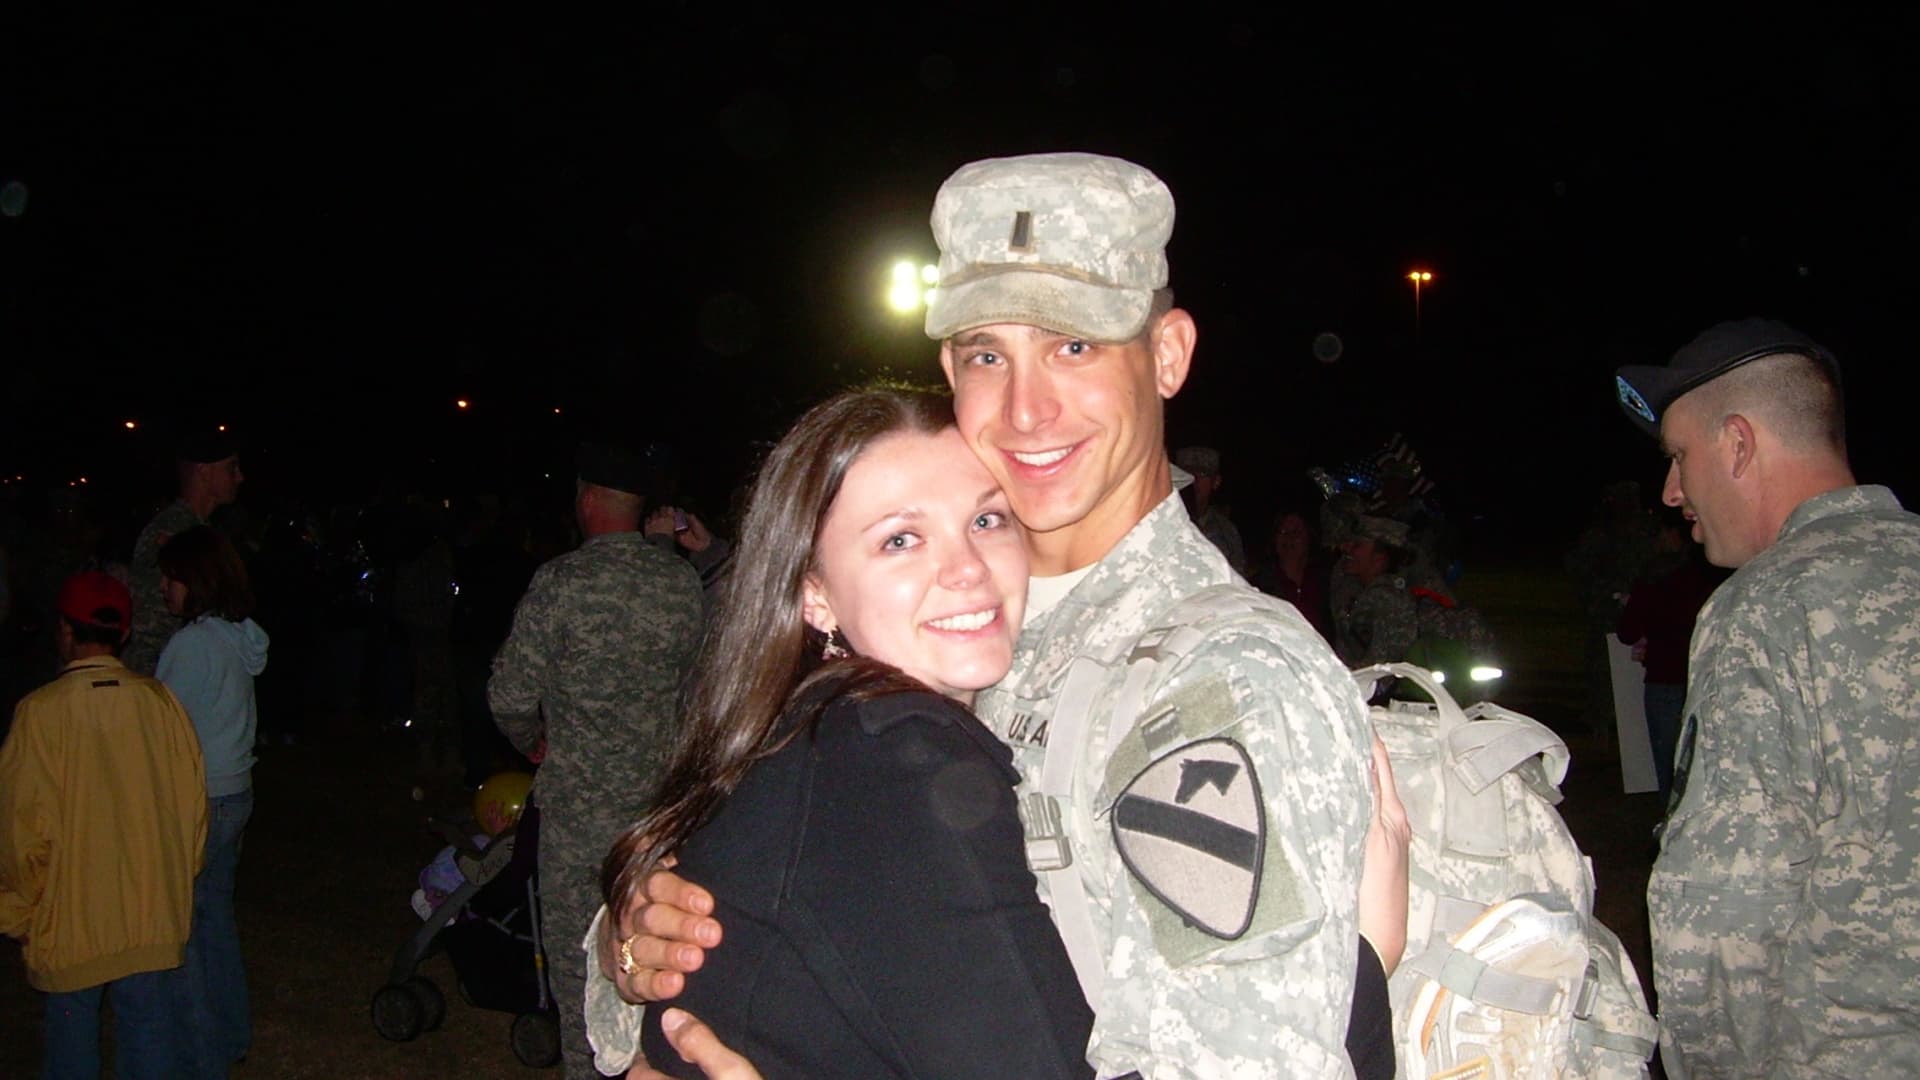 Russell Toll and his wife, Heidi, when he returned from service in Iraq in 2009.